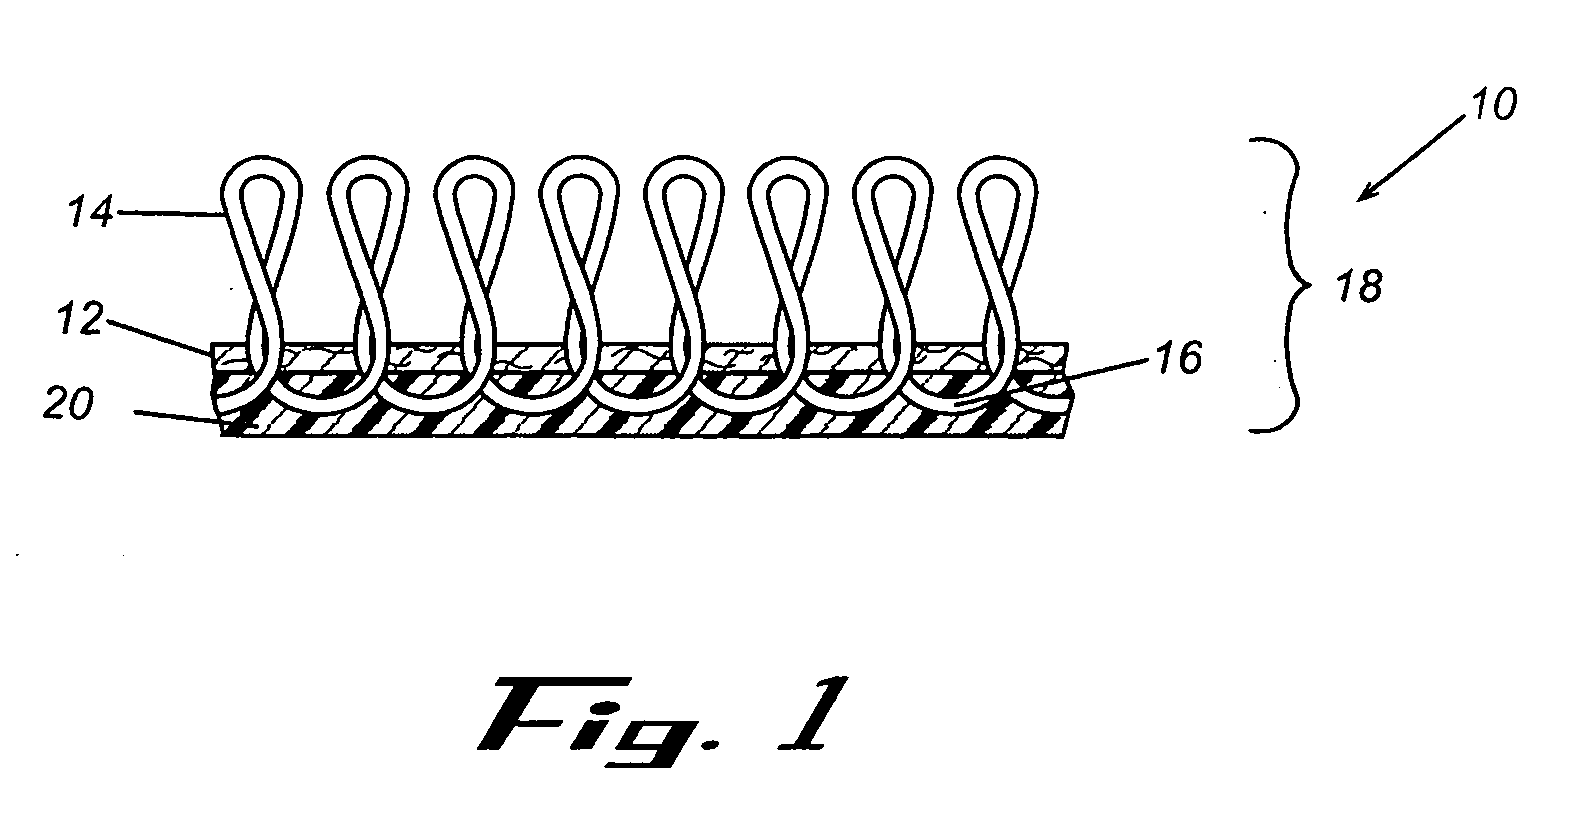 Floor covering product and method of making same